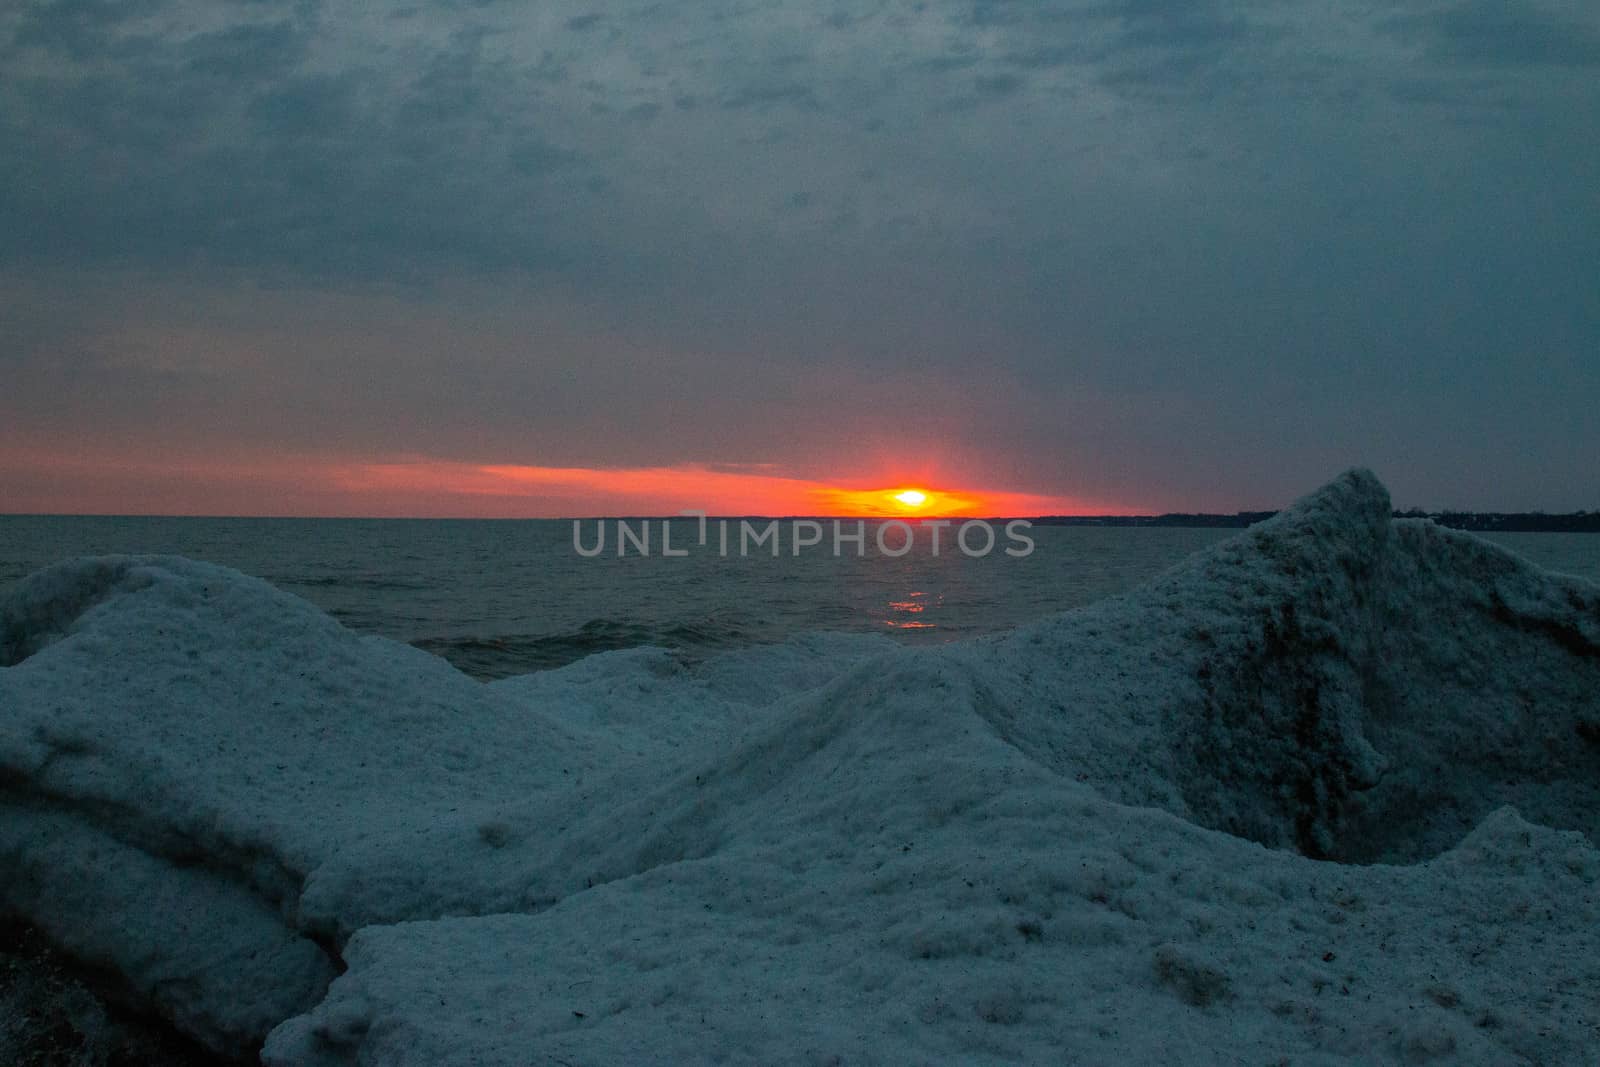 Port stanley beach in winter at sunset. Ontario Canada photograph by mynewturtle1